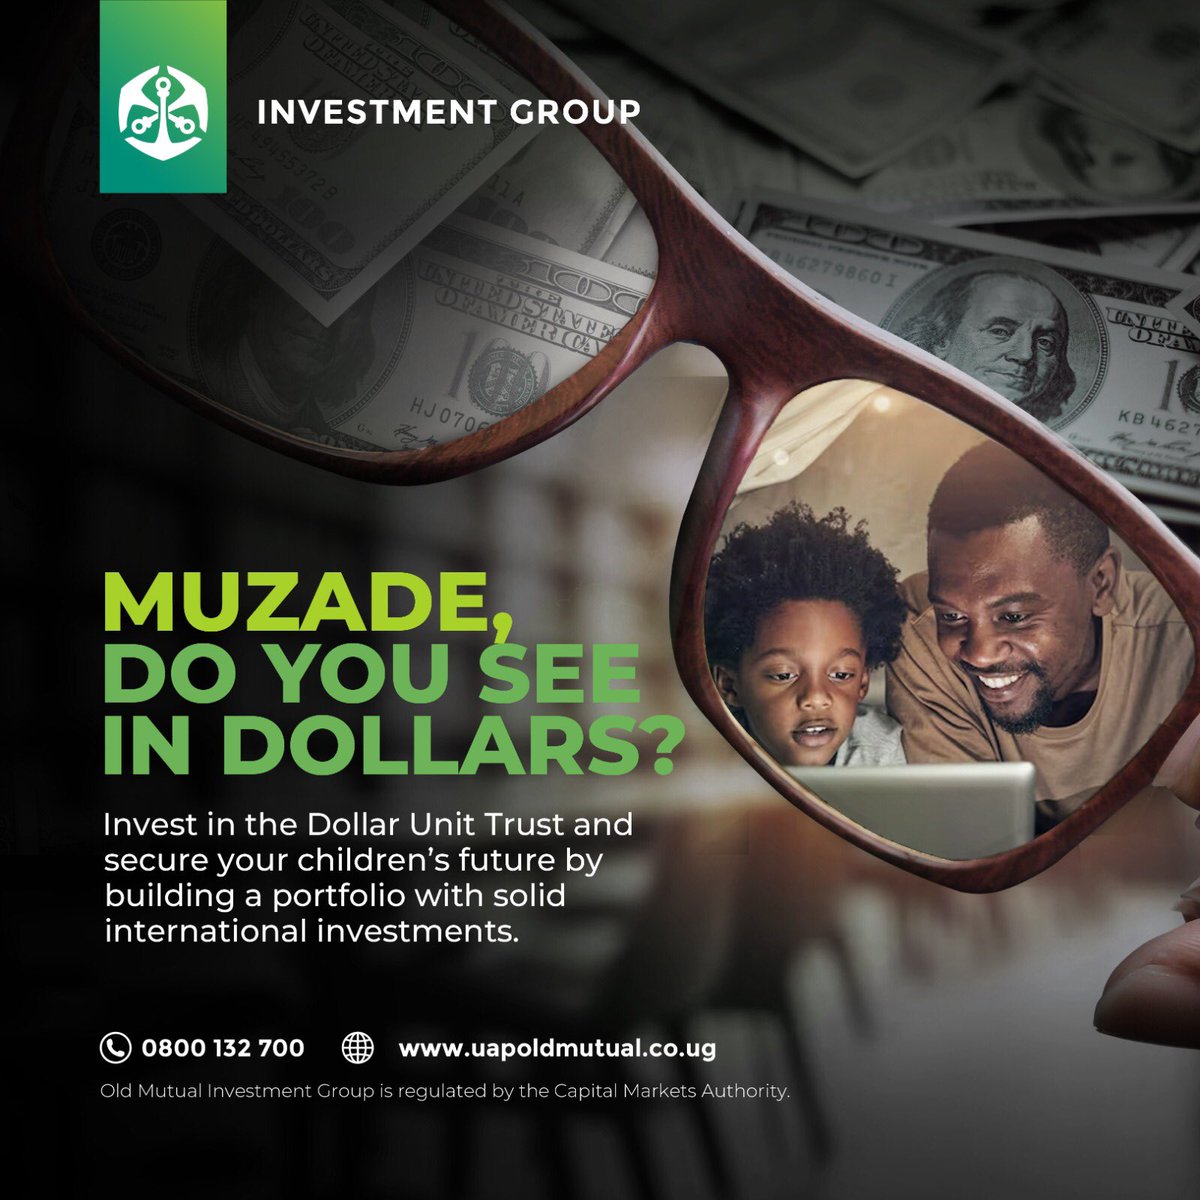 Got a child in an international school? Here's a smart move: Invest in @UAPOldMutualUg’s #DollarUnitTrust for school fees. It offers returns and risk diversification, ensuring a solid financial plan for their education. 
Sign up now: uapoldmutual.co.ug
#TutambuleFfena